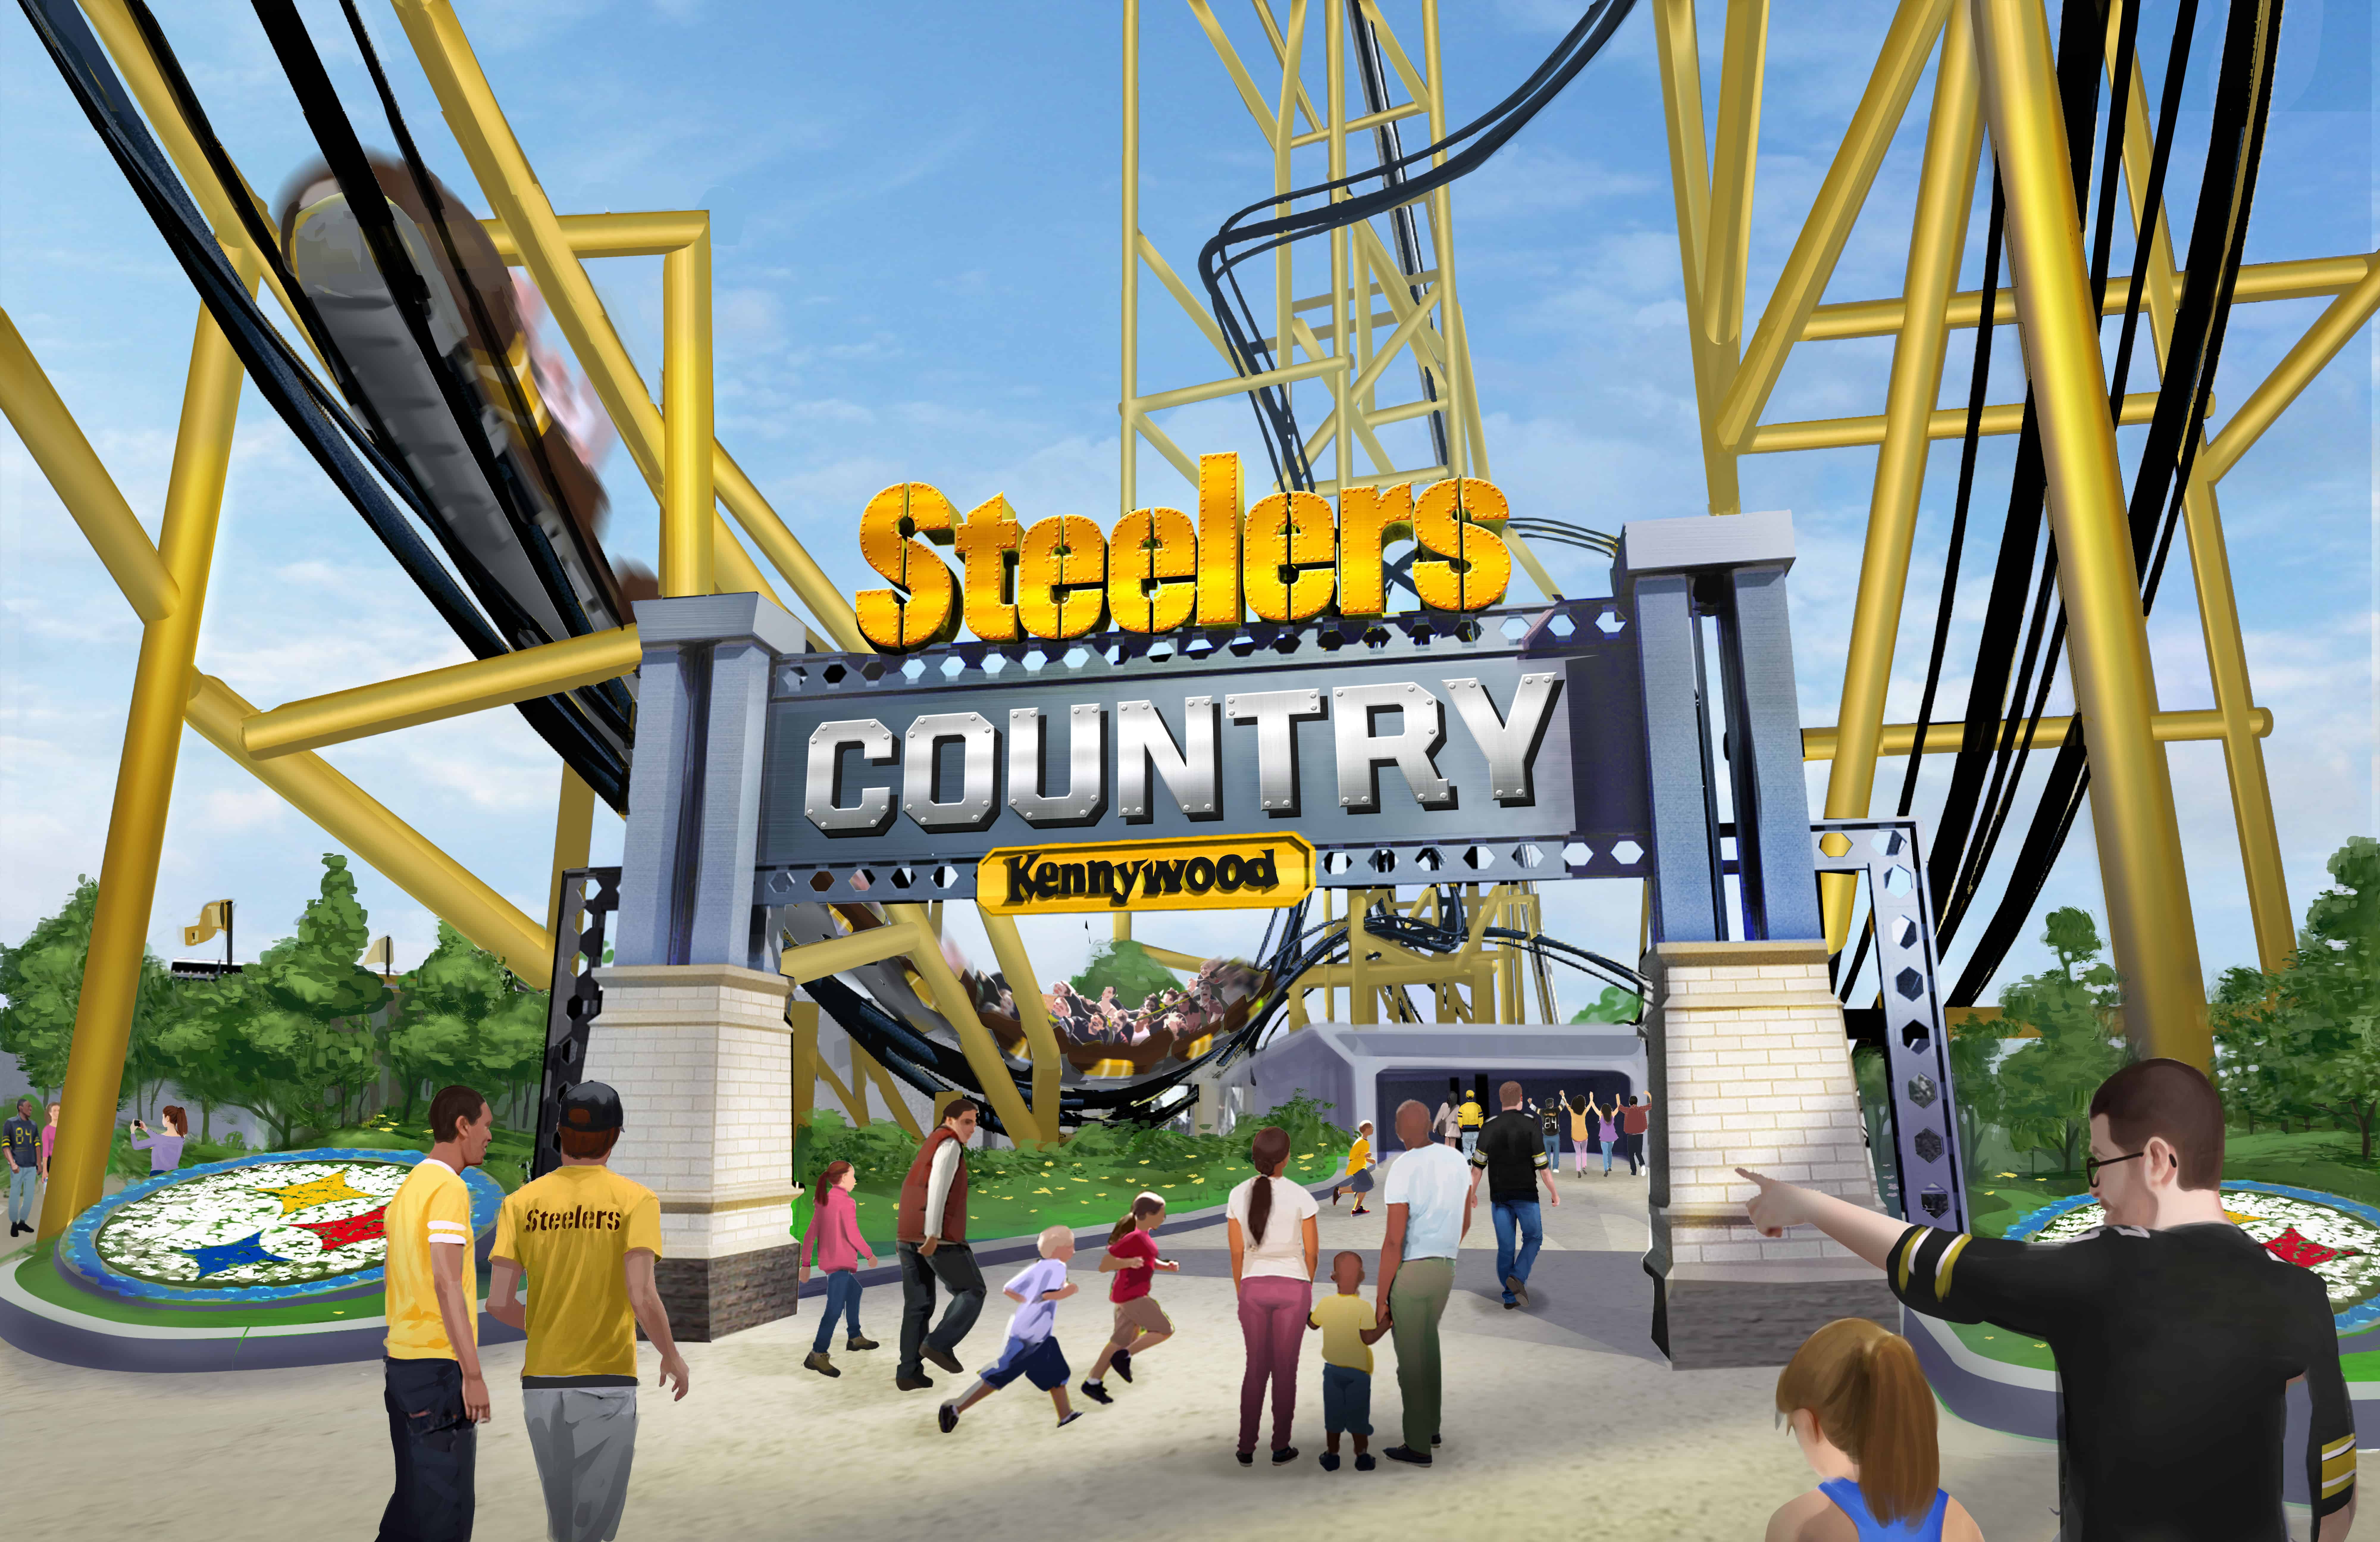 Kennywood Steelers Country: Entrance sign